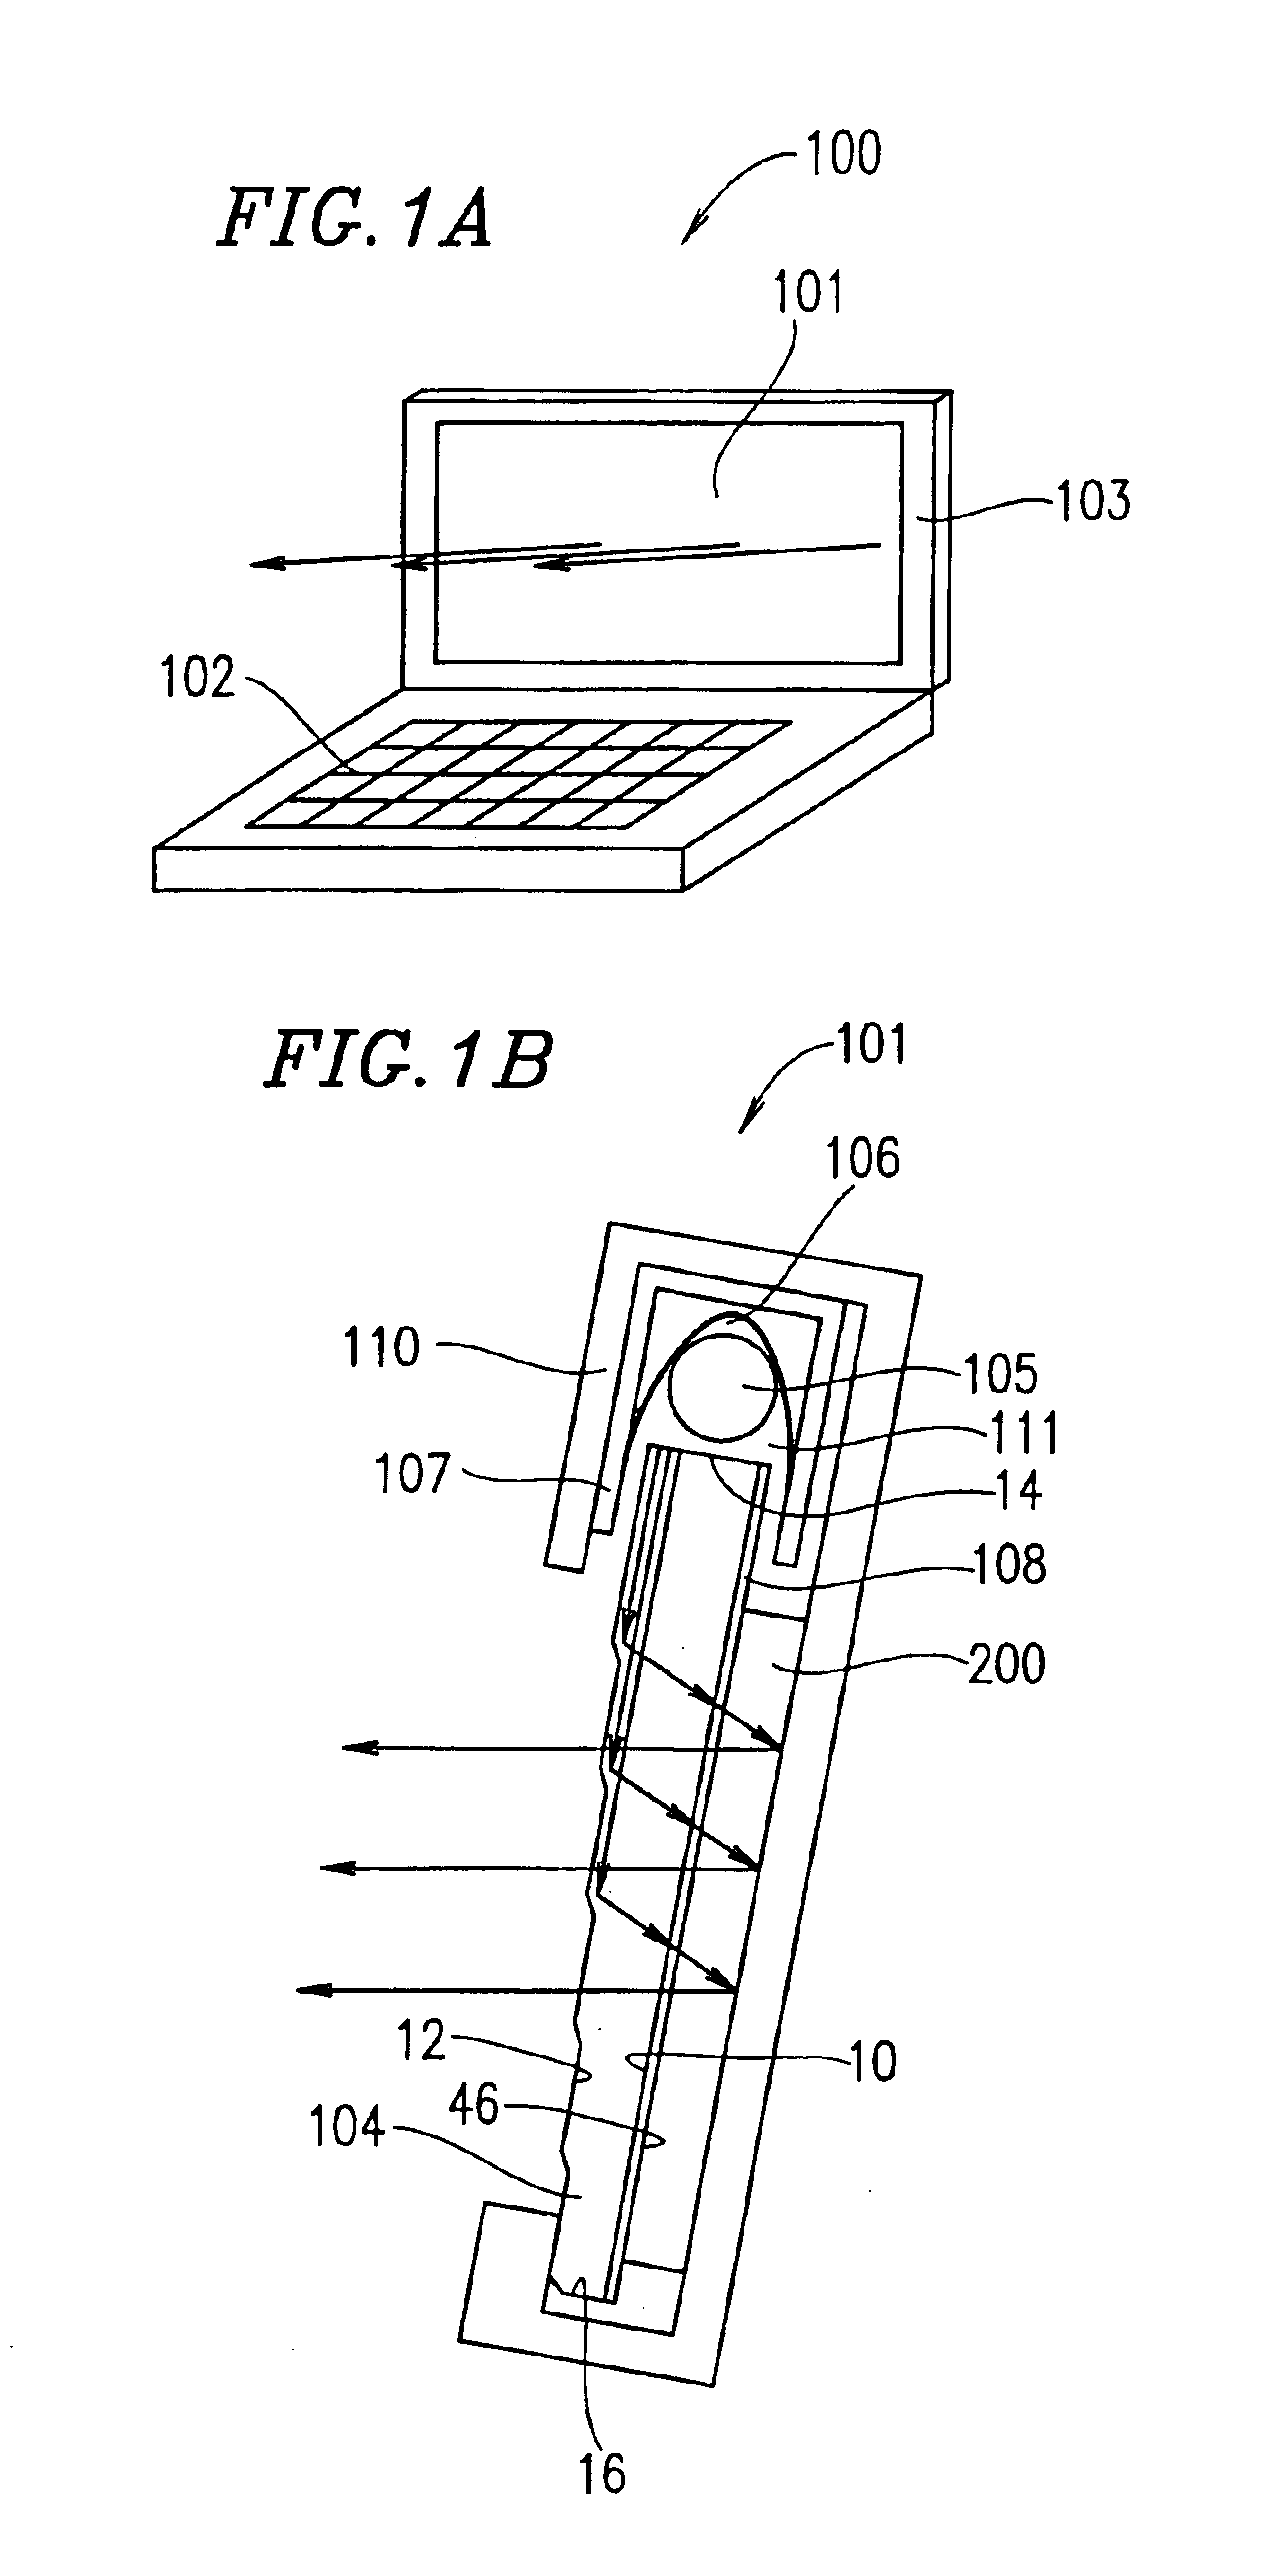 Liquid crystal display apparatus and electronic device incorporating the same